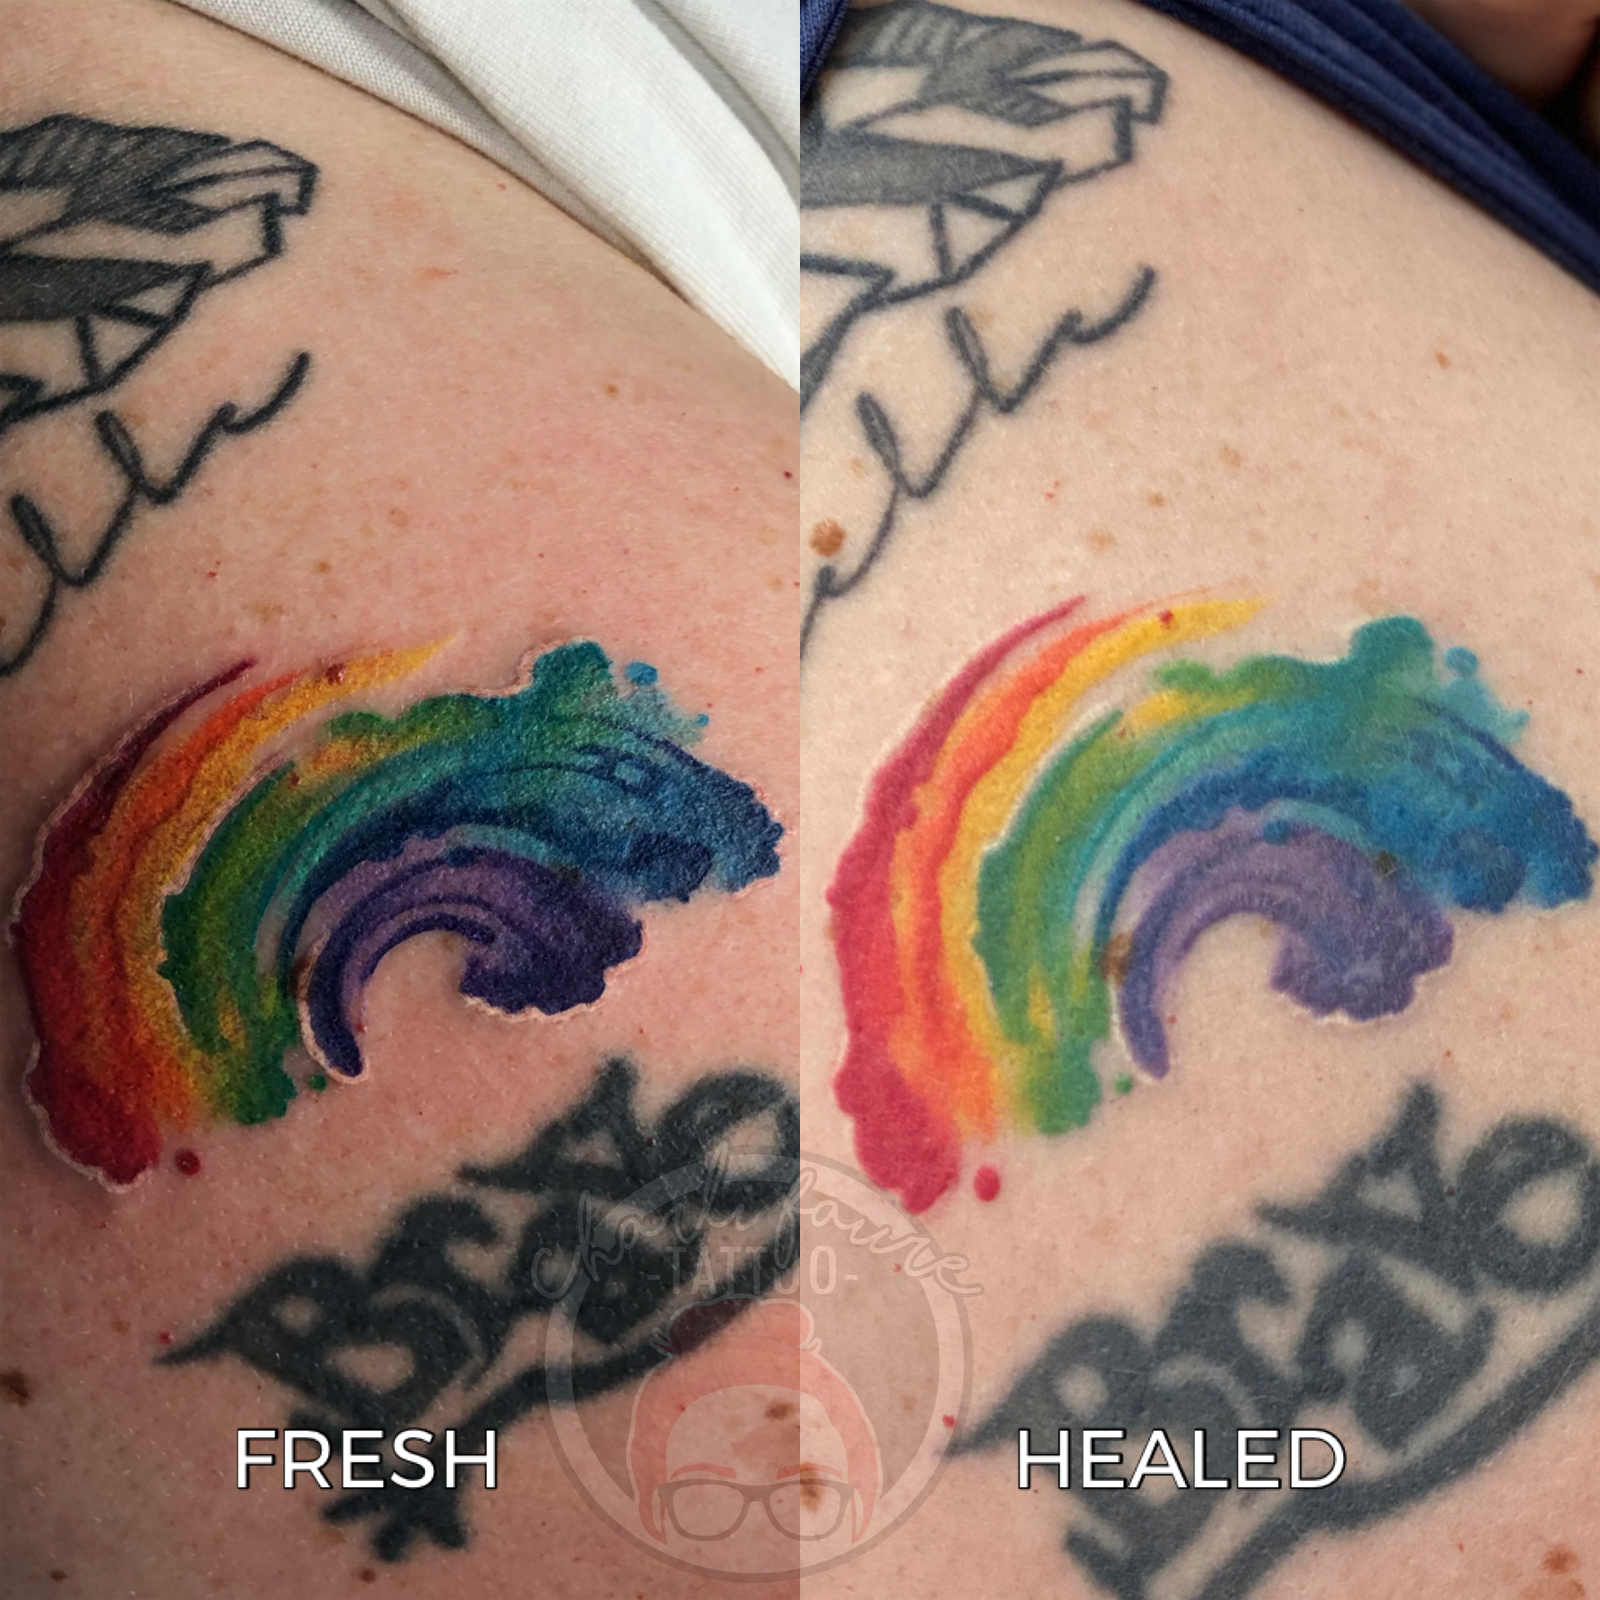 Tattoo Healing Process and Stages: Day-By-Day Aftercare by inknurse - Issuu